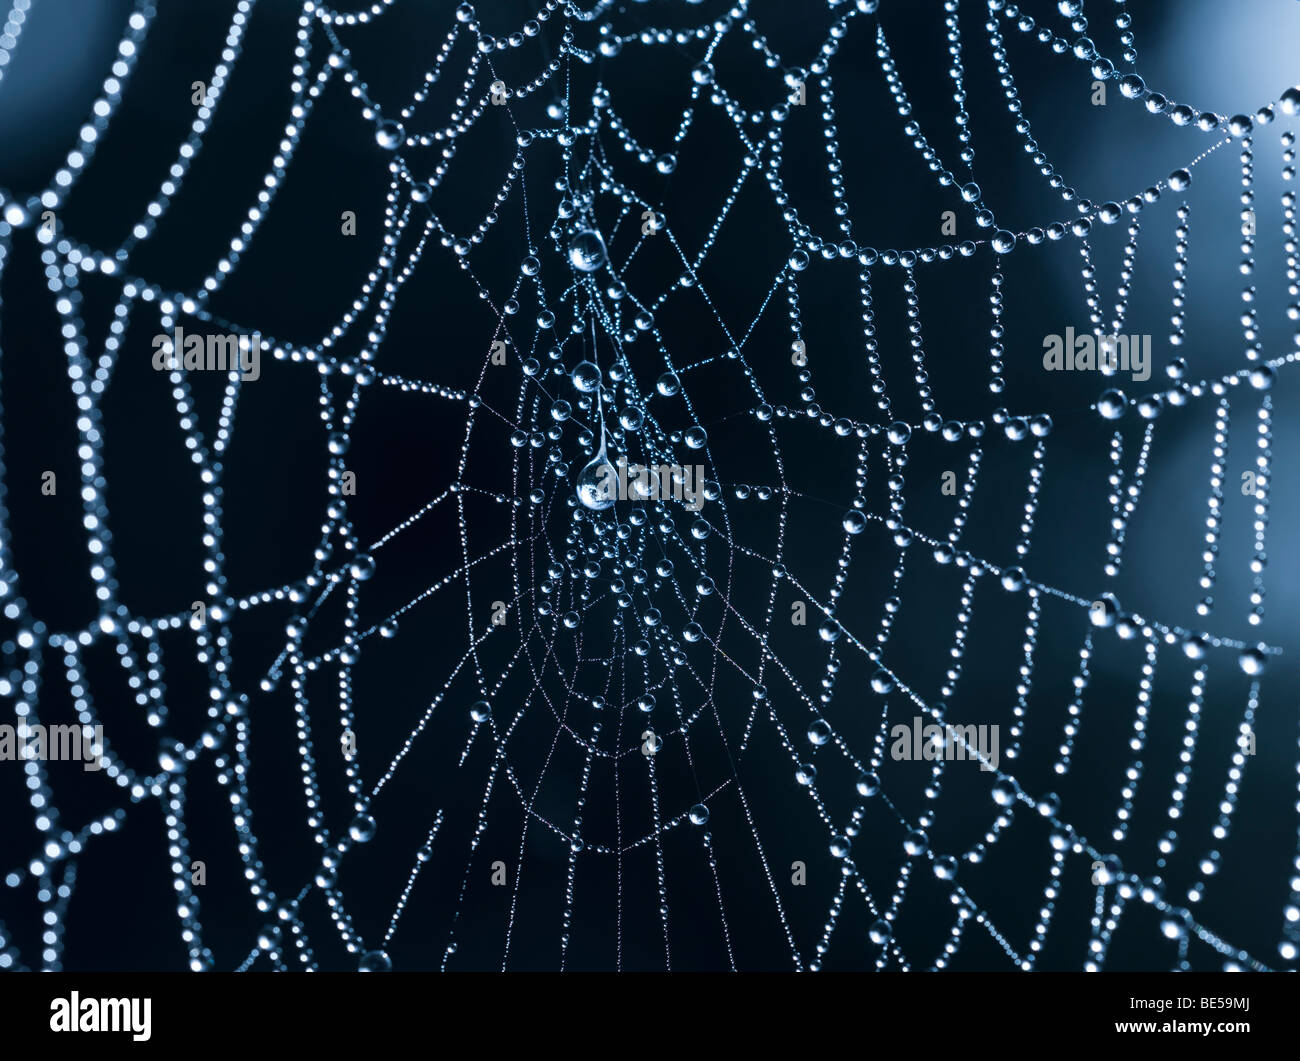 Spider web with dew drops Stock Photo